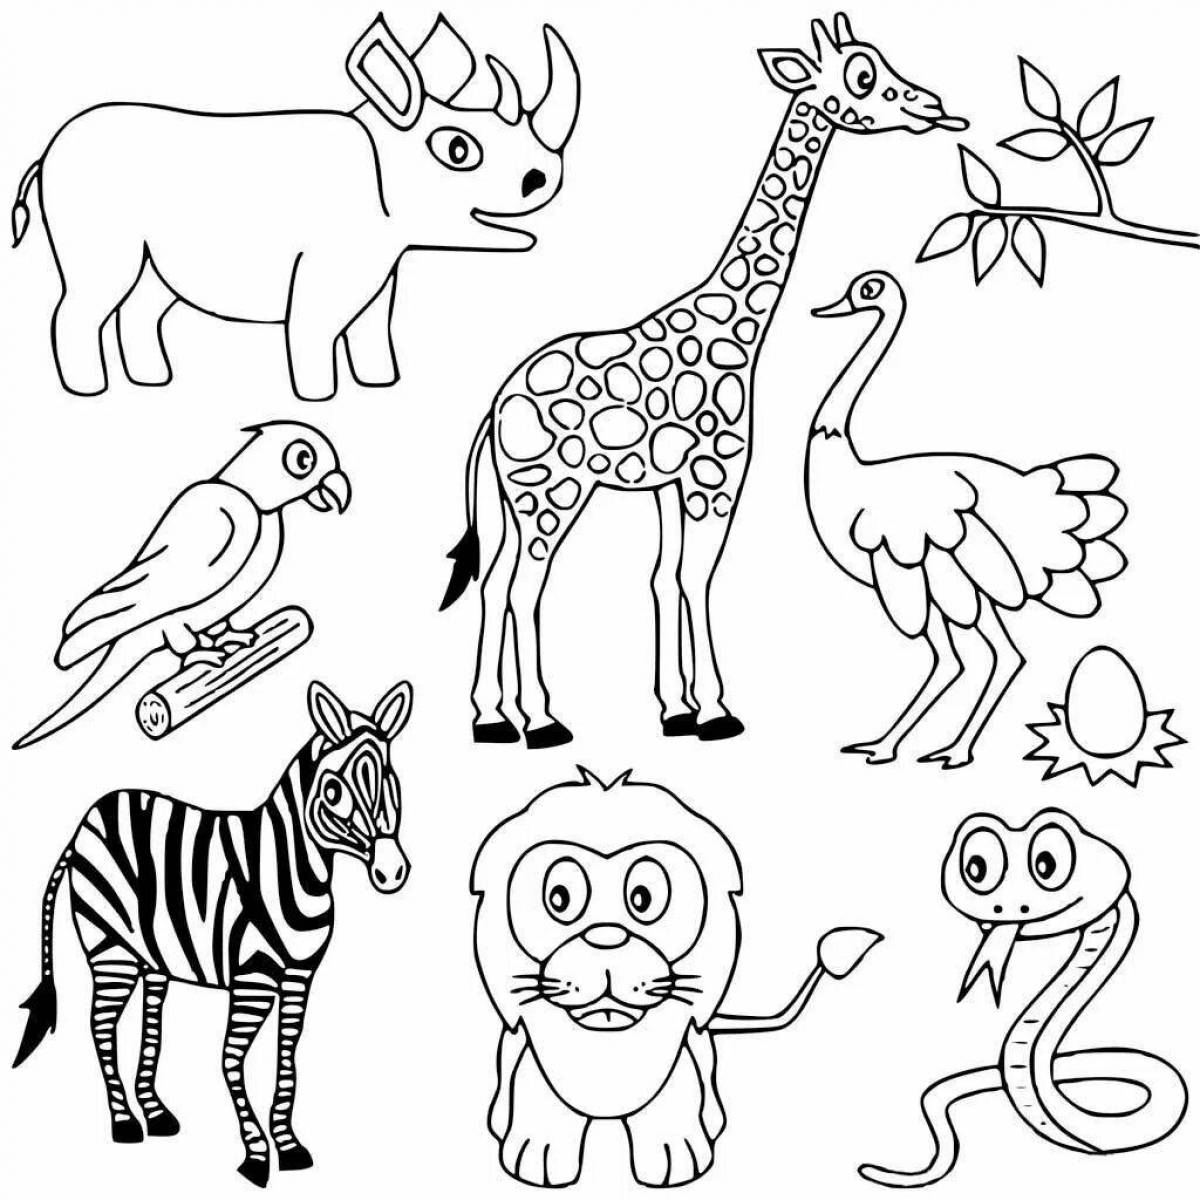 Great coloring book for kids wild animals 2 3 years old